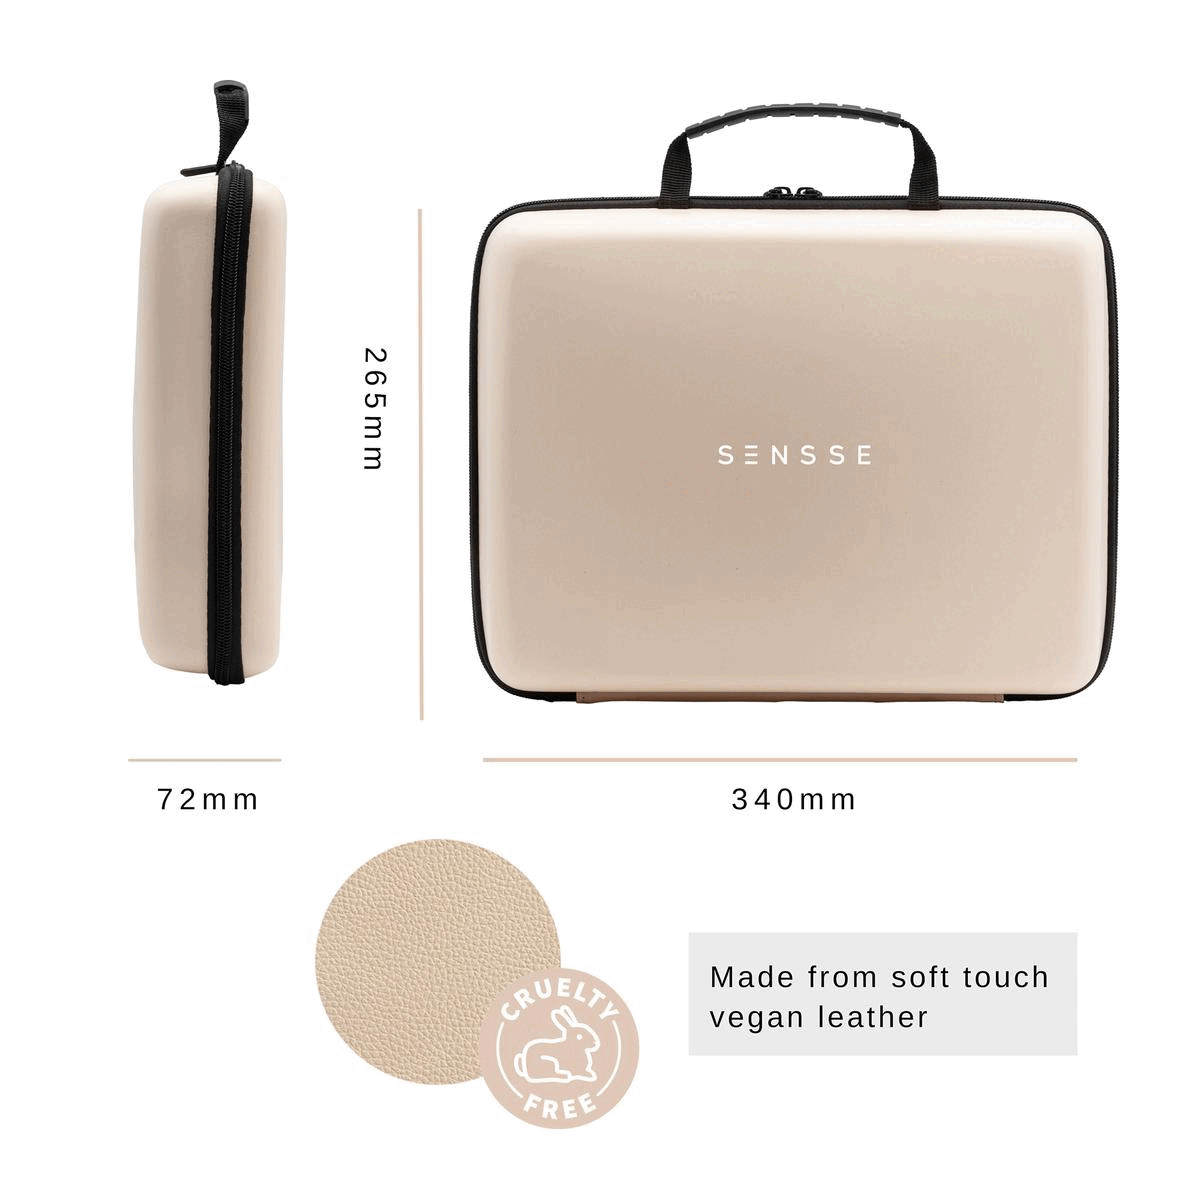 Image 1, made from soft touch vegan leather, dimensions - H, 265mm L, 340mm W, 72mm Image 2, 3 side zip with an internal storage pocket perfect for protecting and looking after your SENSSE collection